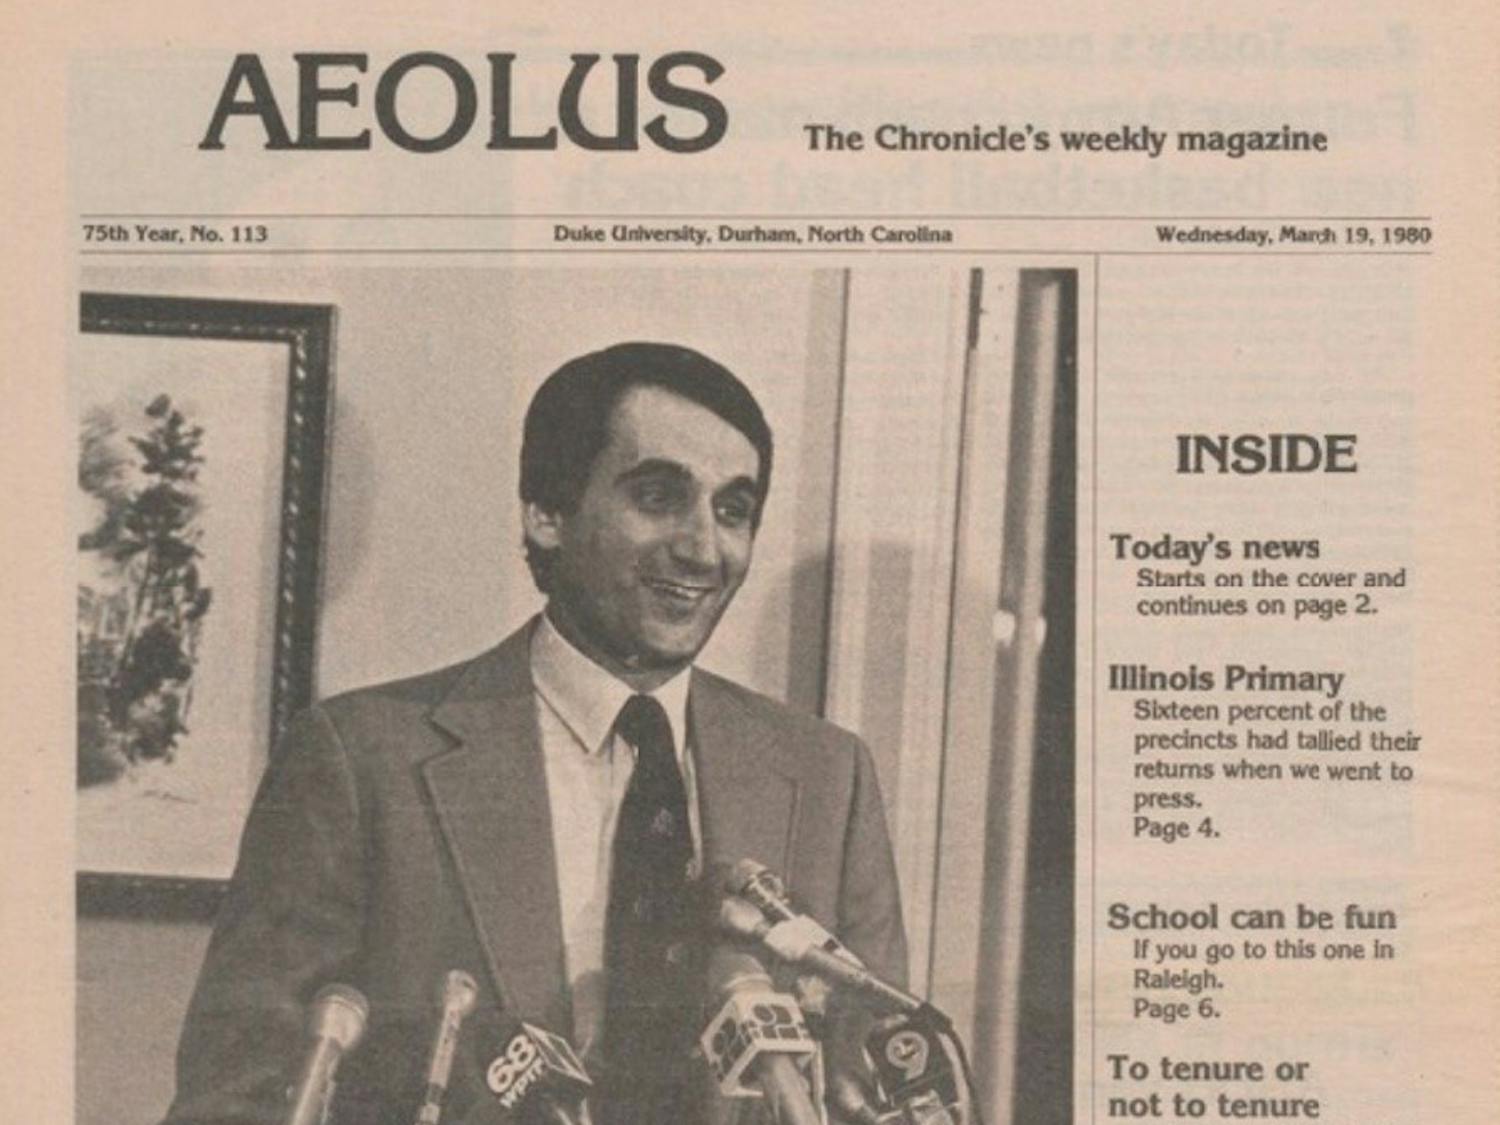 From his appointment as Duke men's basketball head coach to his ACC Championship win in 2019, The Chronicle has been there to document all of Coach K's successes. Take a look at the iconic Chronicle print editions featuring the victories and milestones of the most winningest coach in college basketball history.
Gallery by Leah Boyd. Captions by Chronicle sports staff.